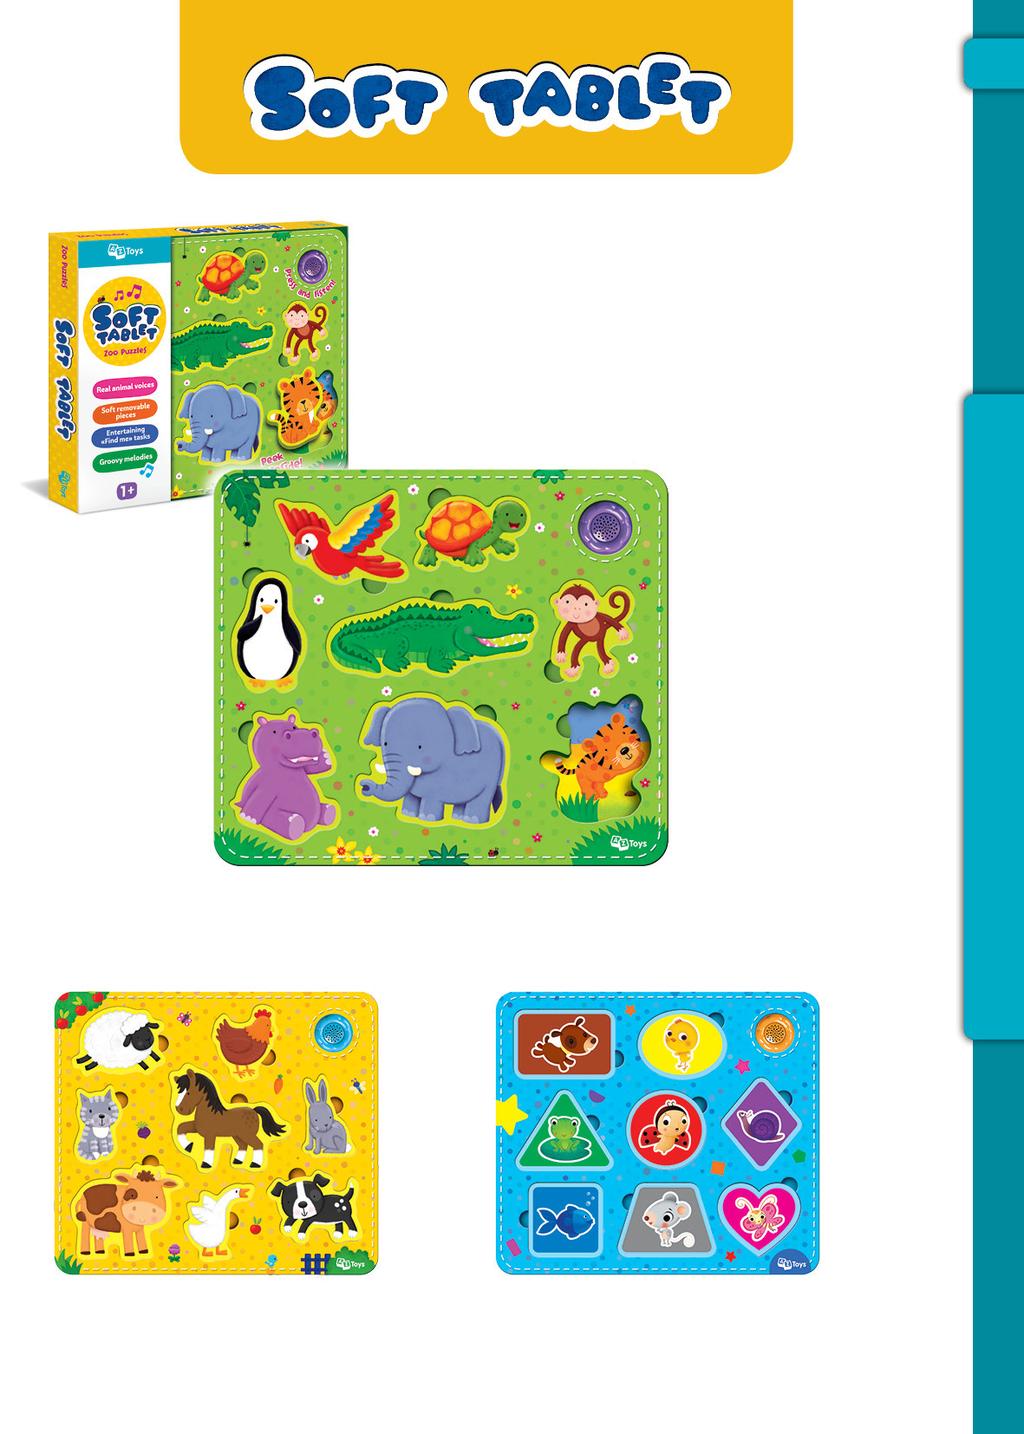 55 ZOO PUZZLES REF. AZT-27-A-001 1 + Real animal voices Soft removable pieces Entertaining Find me tasks Groovy melodies FARM PUZZLES REF. AZT-27-A-003 FIRST KNOWLEDGE REF.